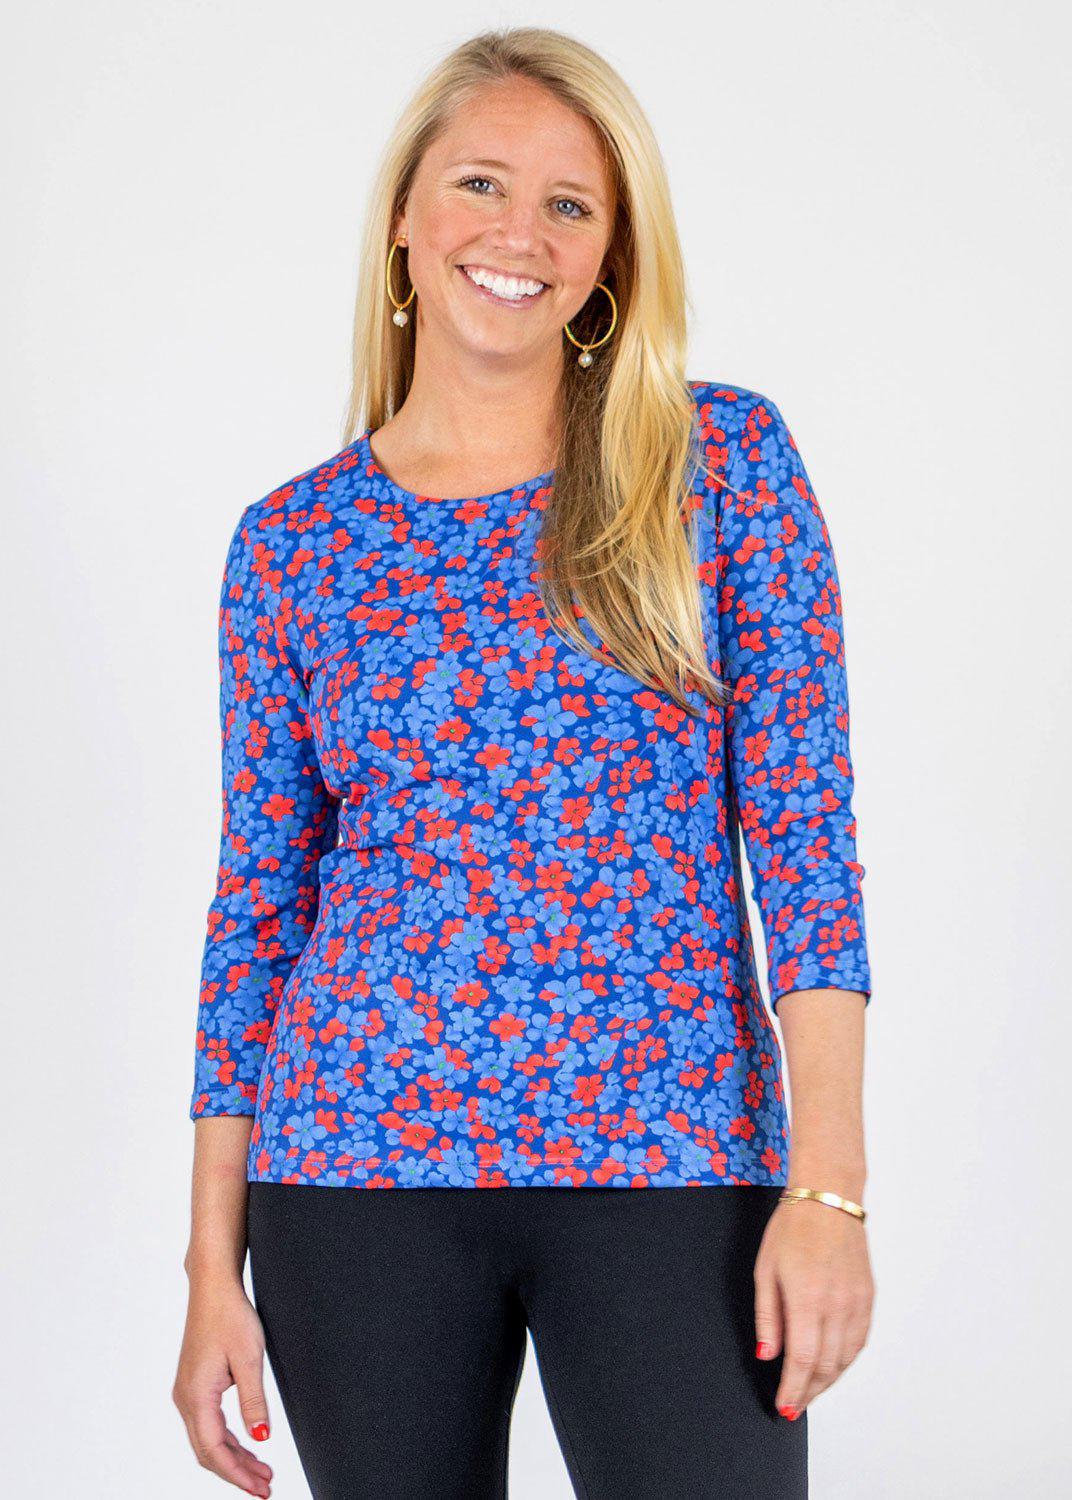 4 Sleeve Top in a Floral Print